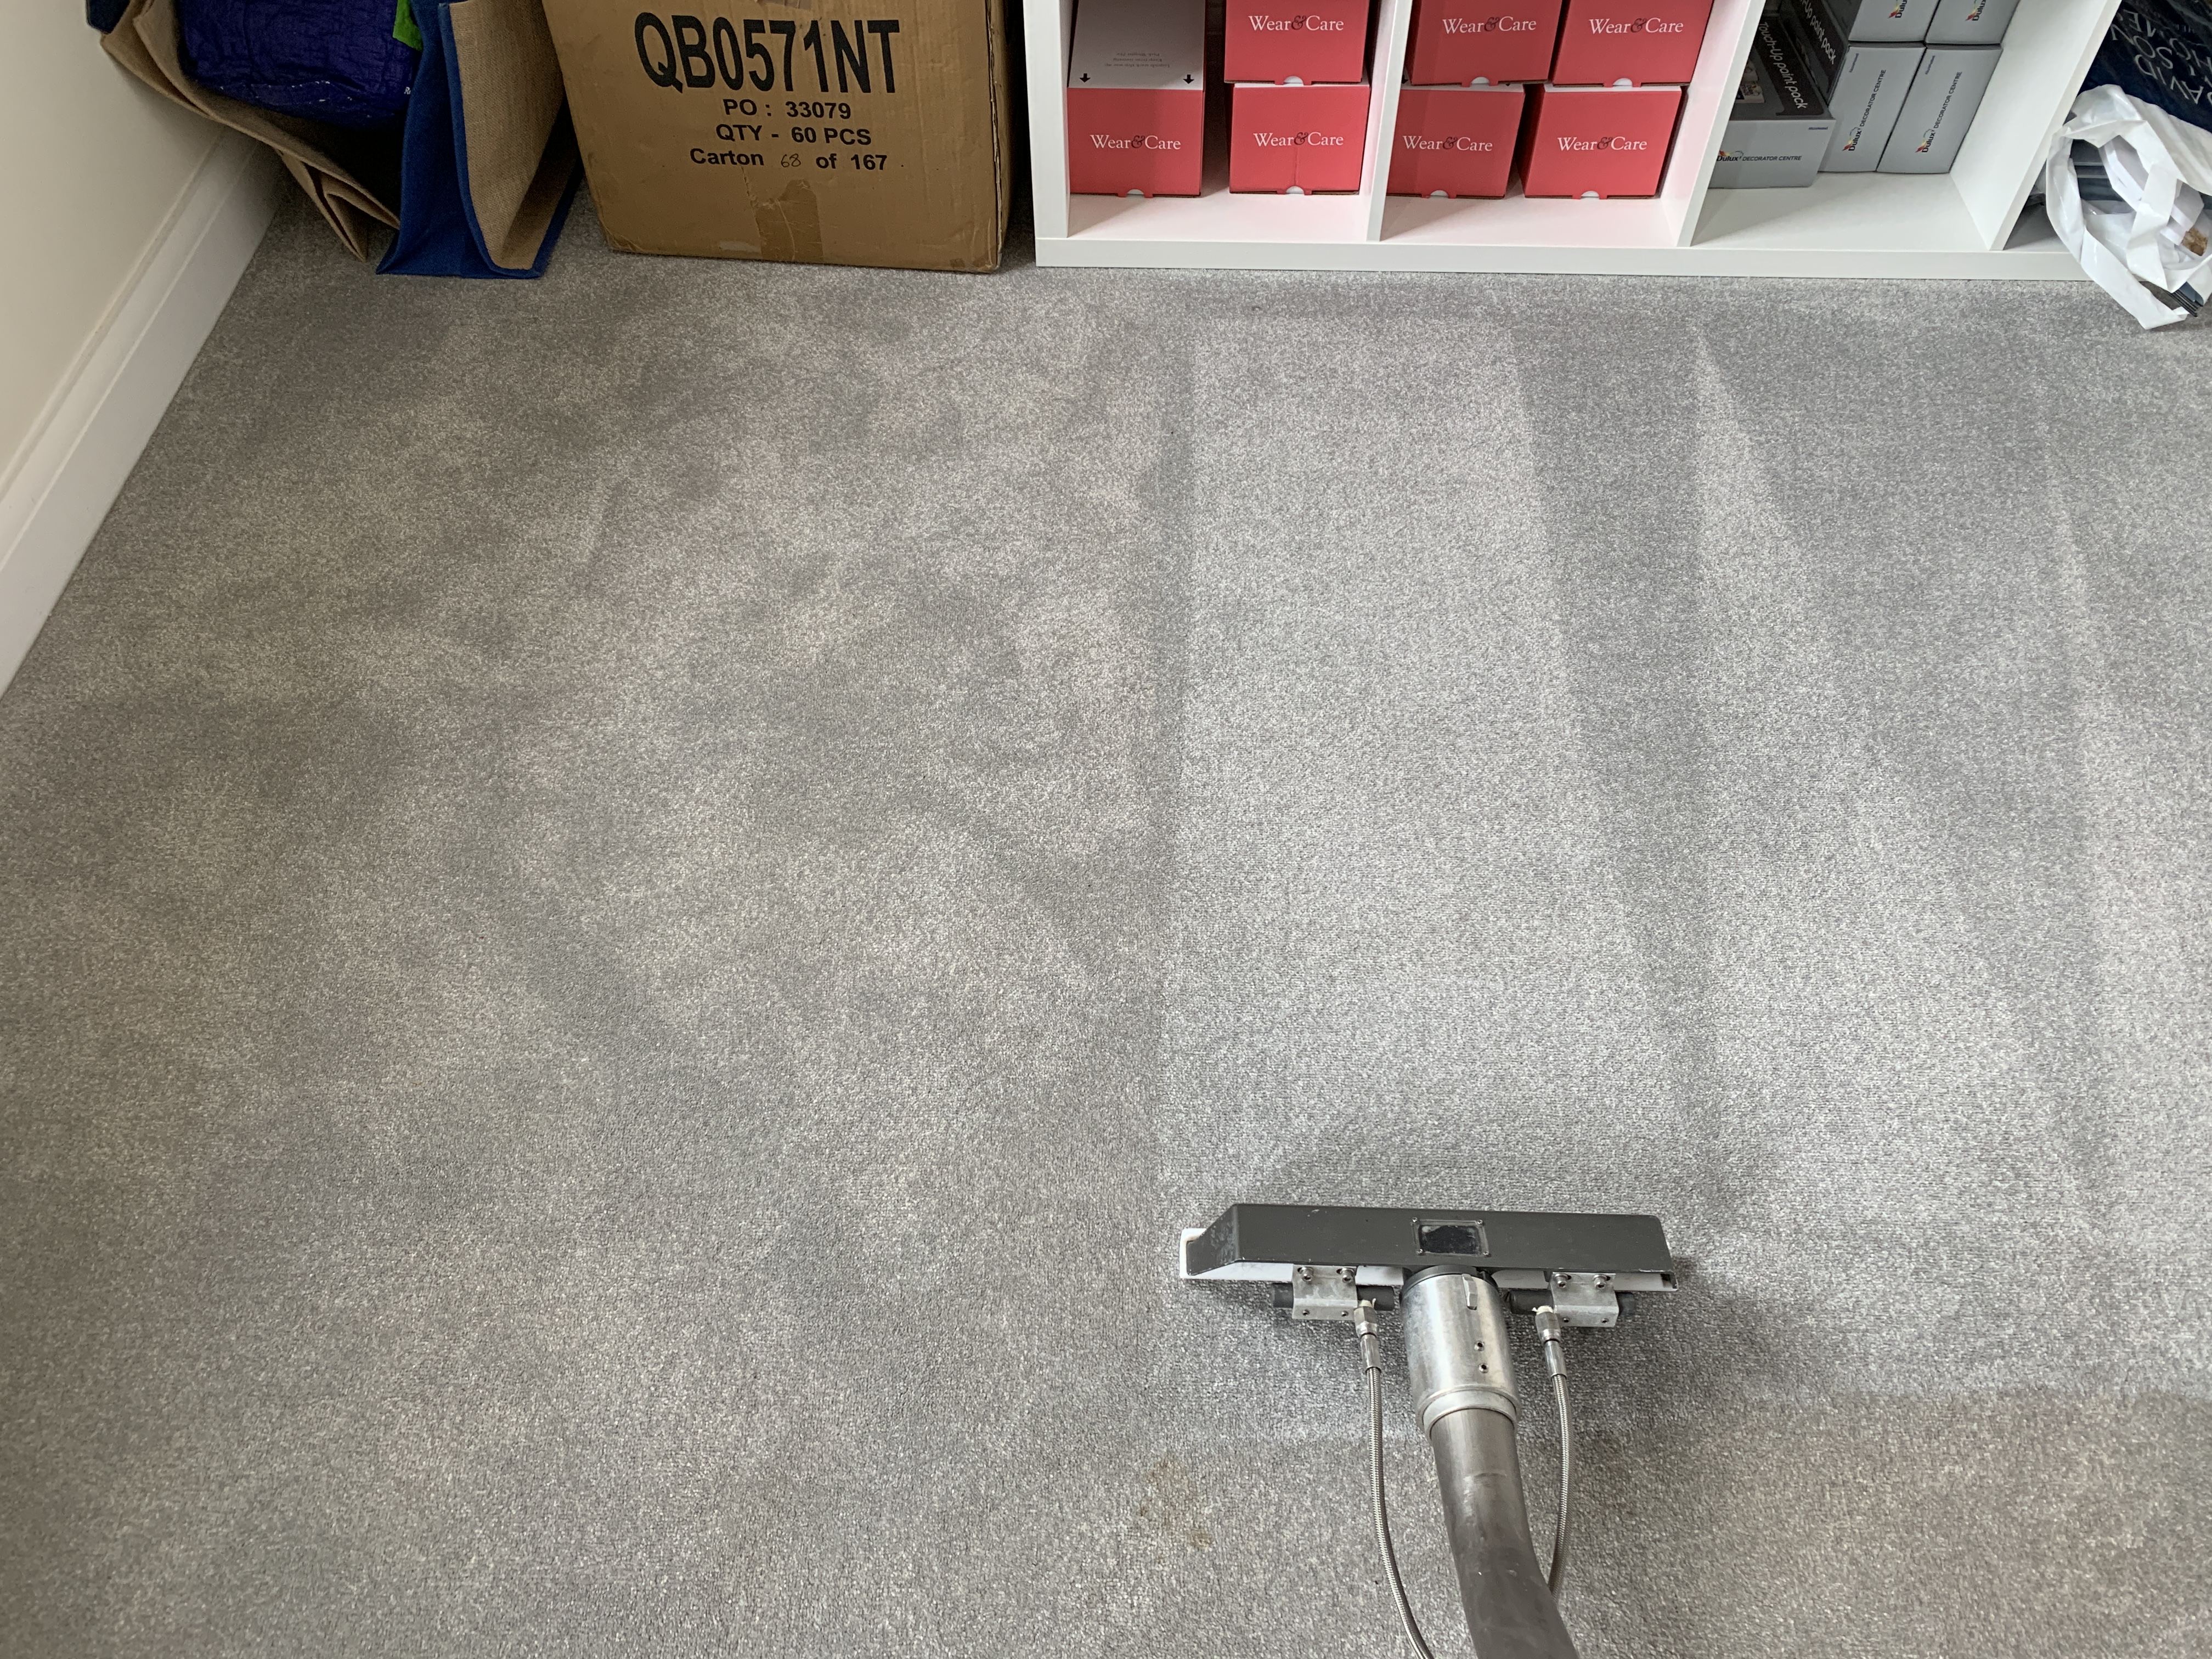 image of carpet being cleaned